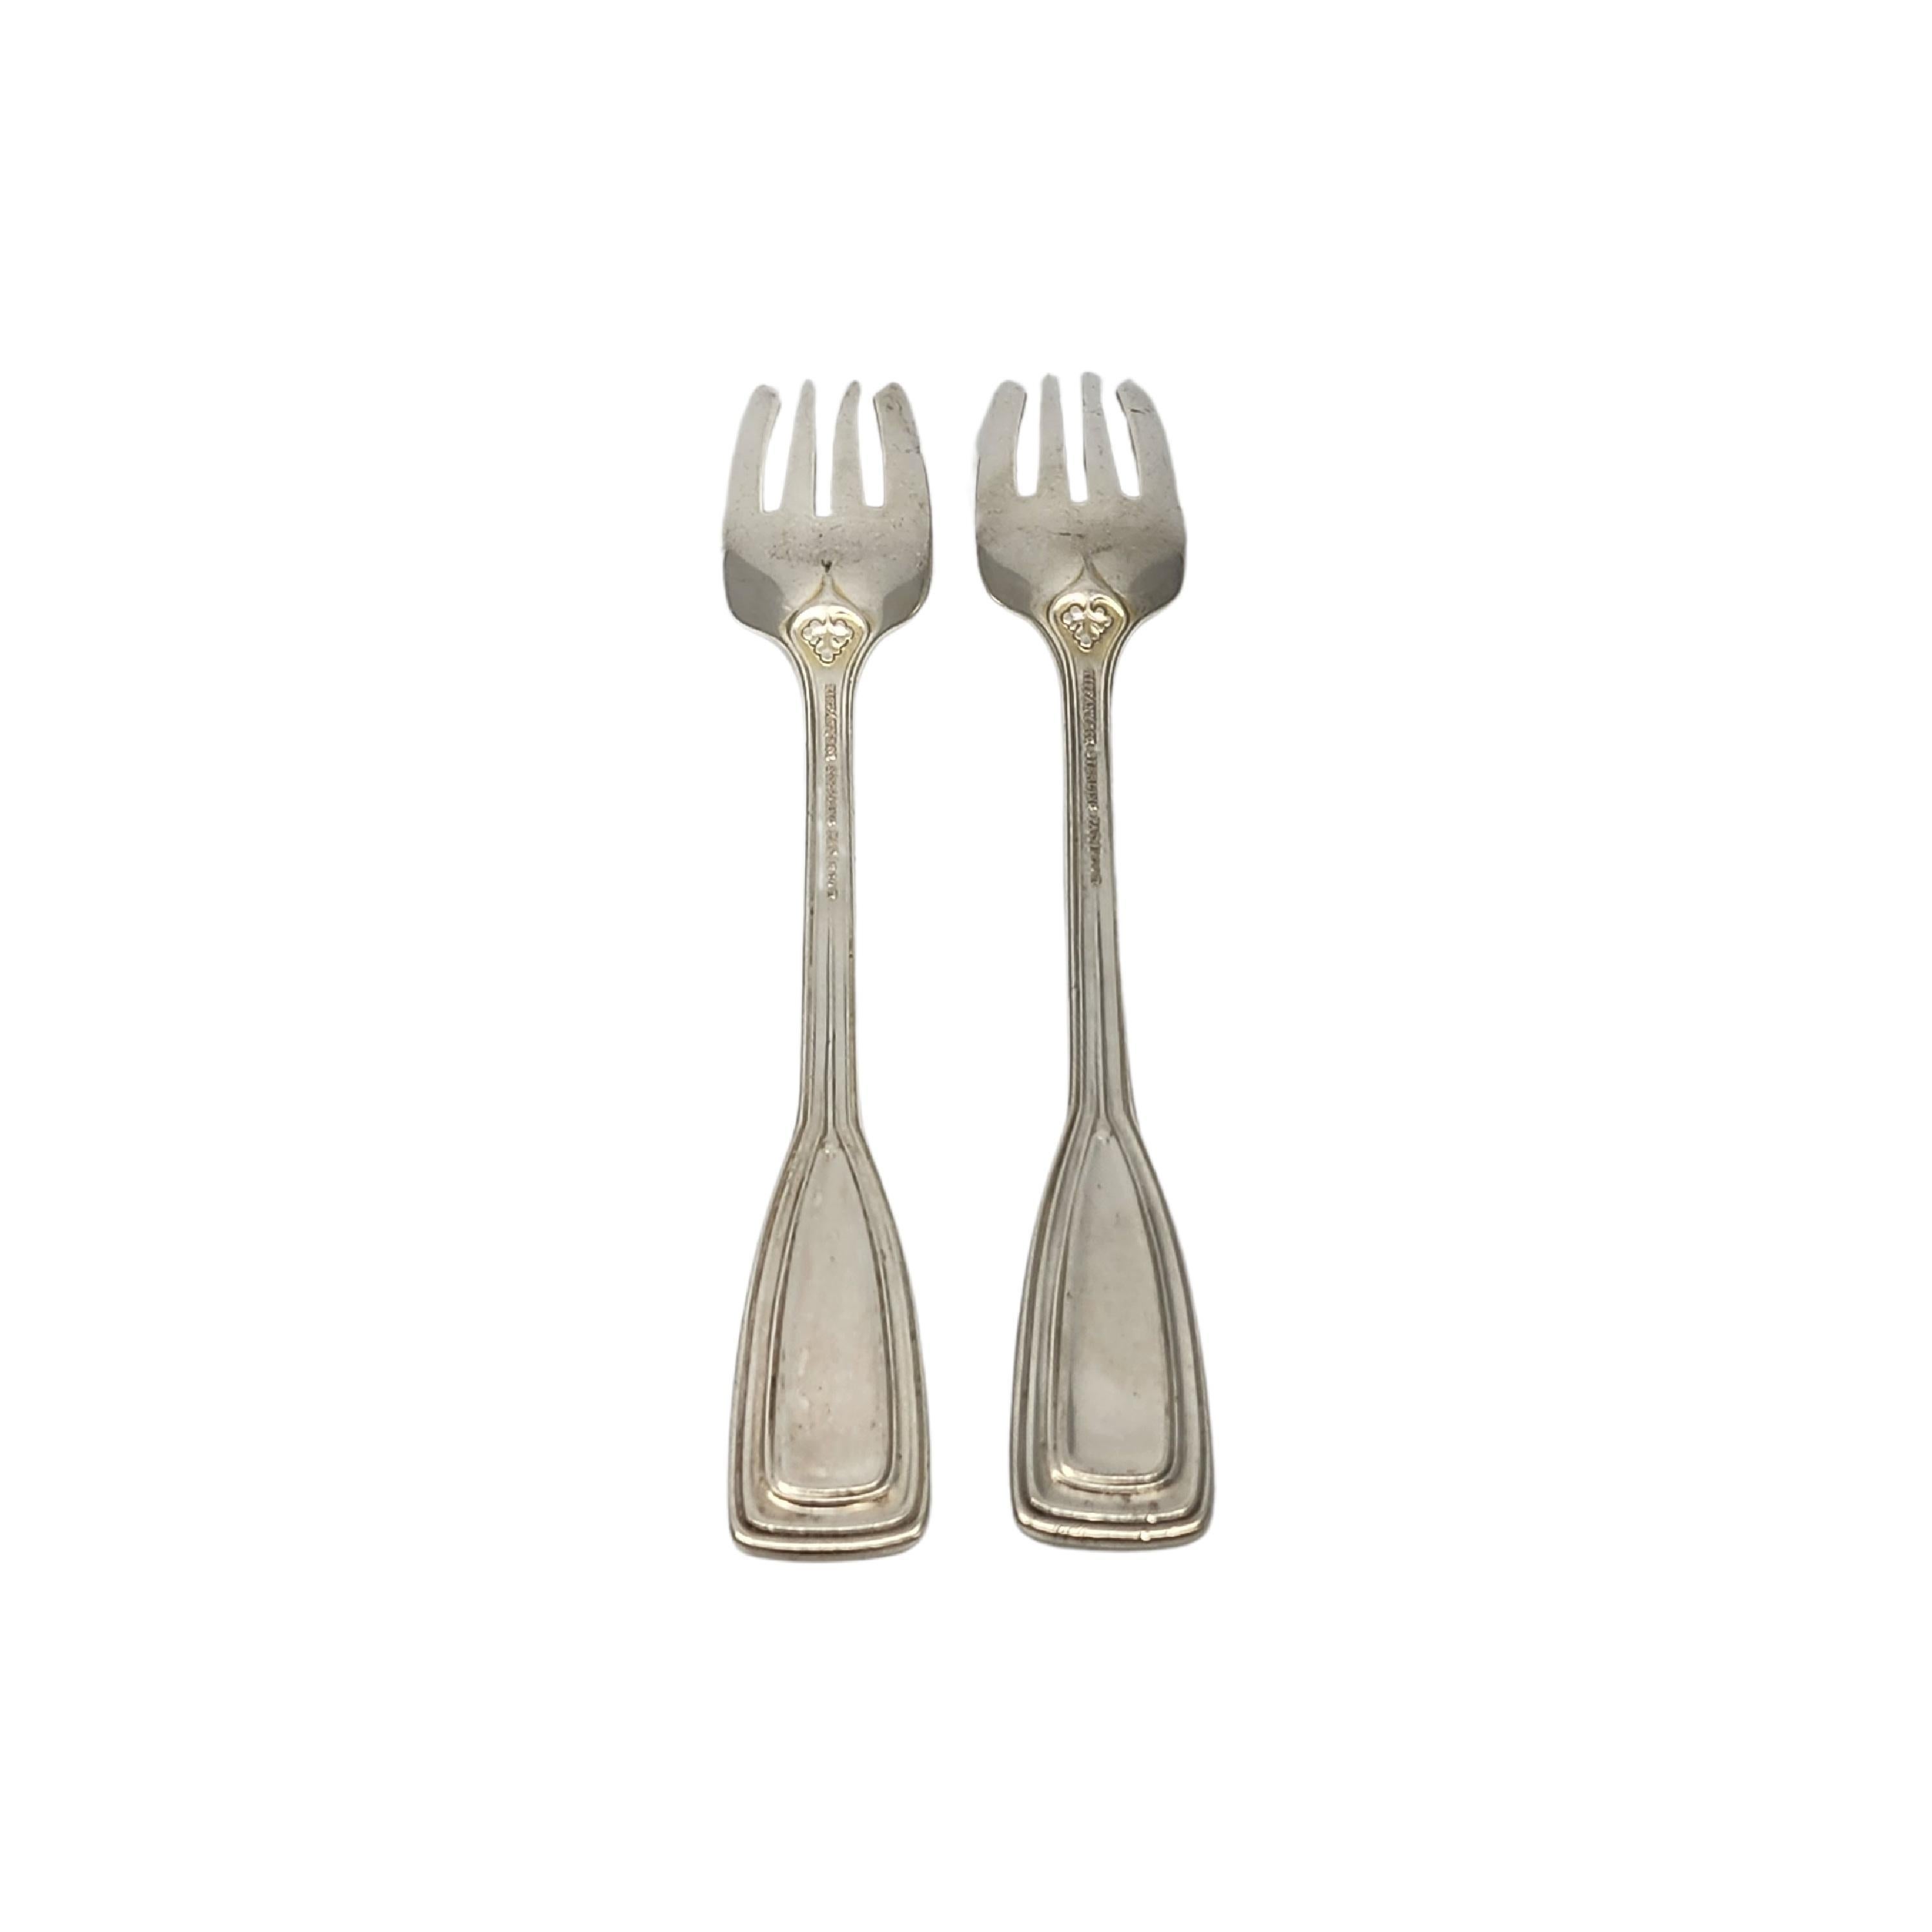 Set of 2 sterling silver salad forks by Tiffany & Co in the St. Dunstan pattern with monogram.

Monogram appears to be W

Designed by Albert A. Southwick in 1909 and named for the patron saint of gold and silversmiths, Tiffany's St. Dunstan pattern